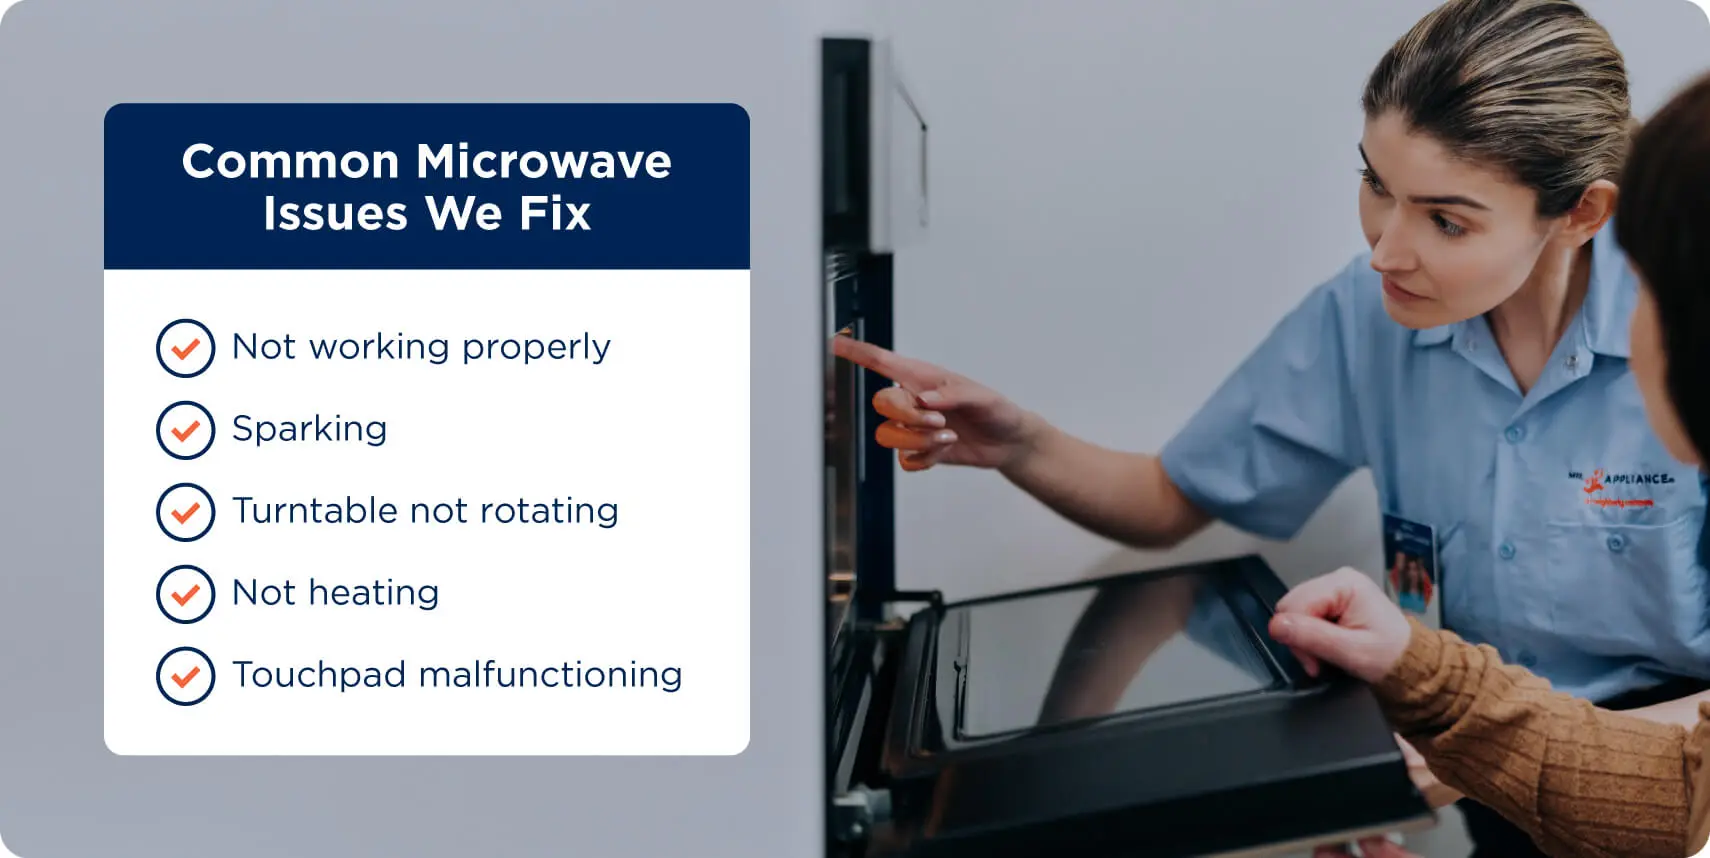 Mr. Appliance service professional fixing a microwave with a list of common microwave issues: Not working properly, sparking, turntable not rotating, not heating, touchpad malfunctioning.